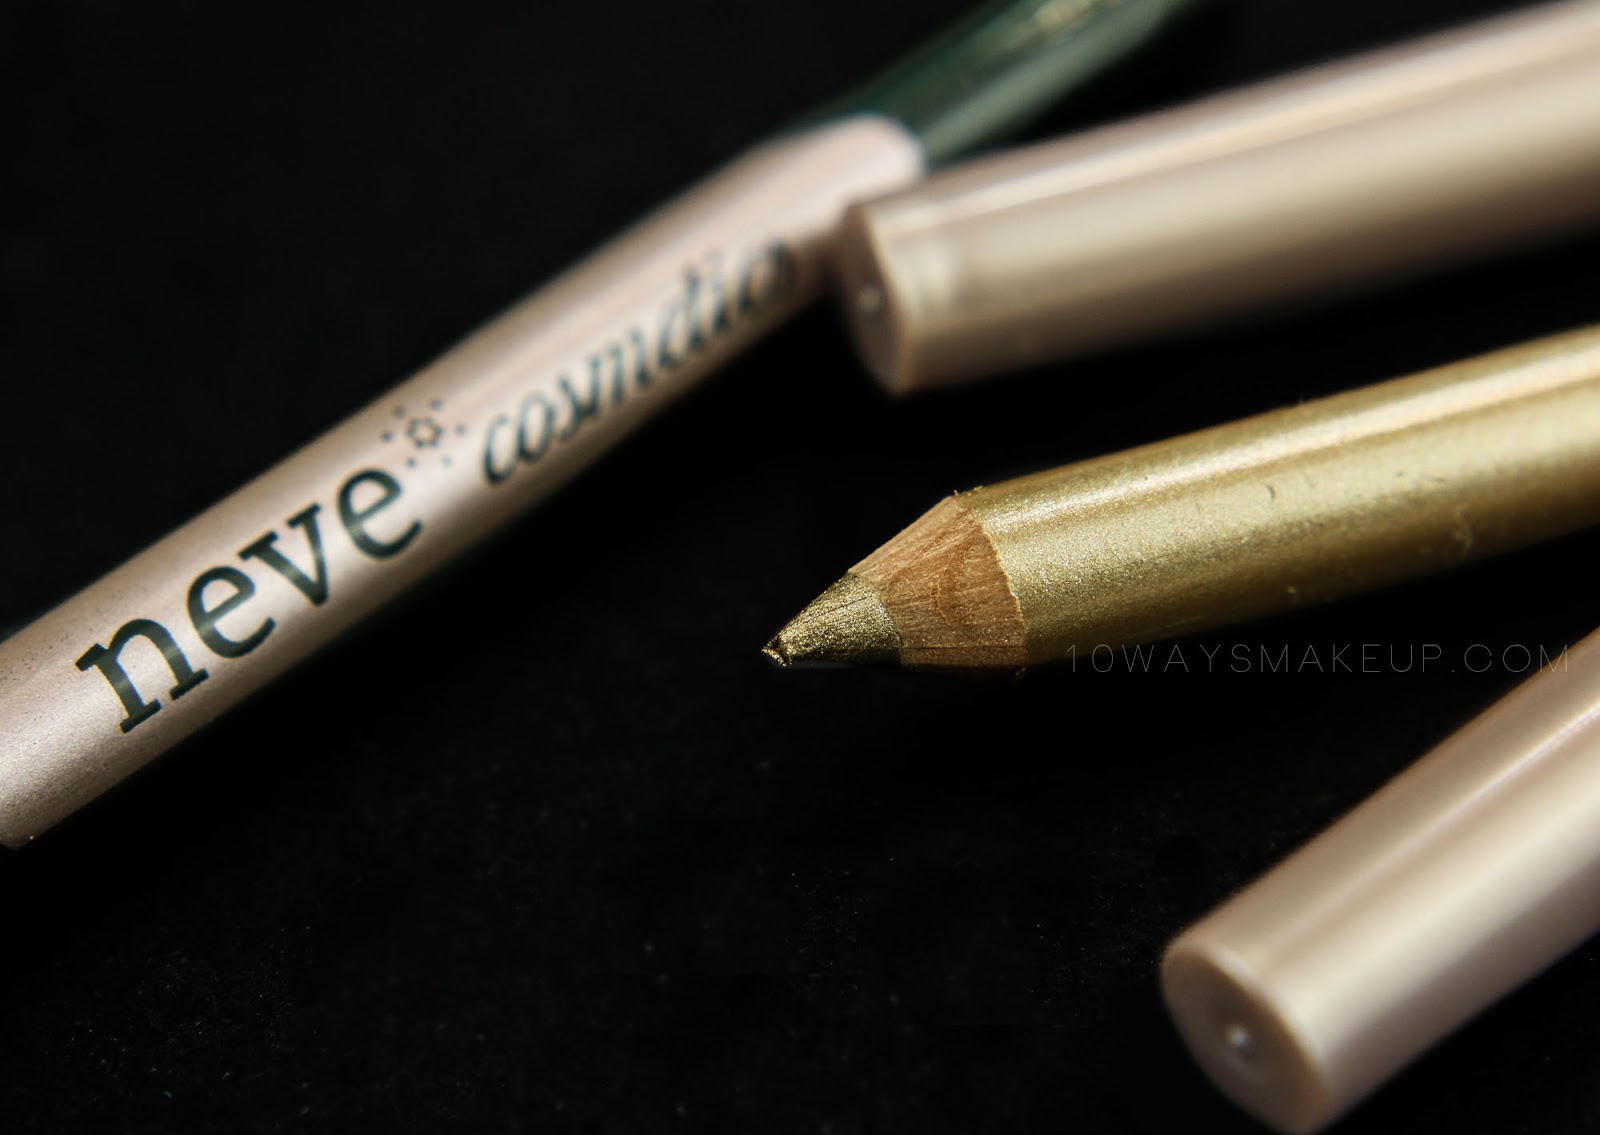 Neve Neogothic Pastello swatch review